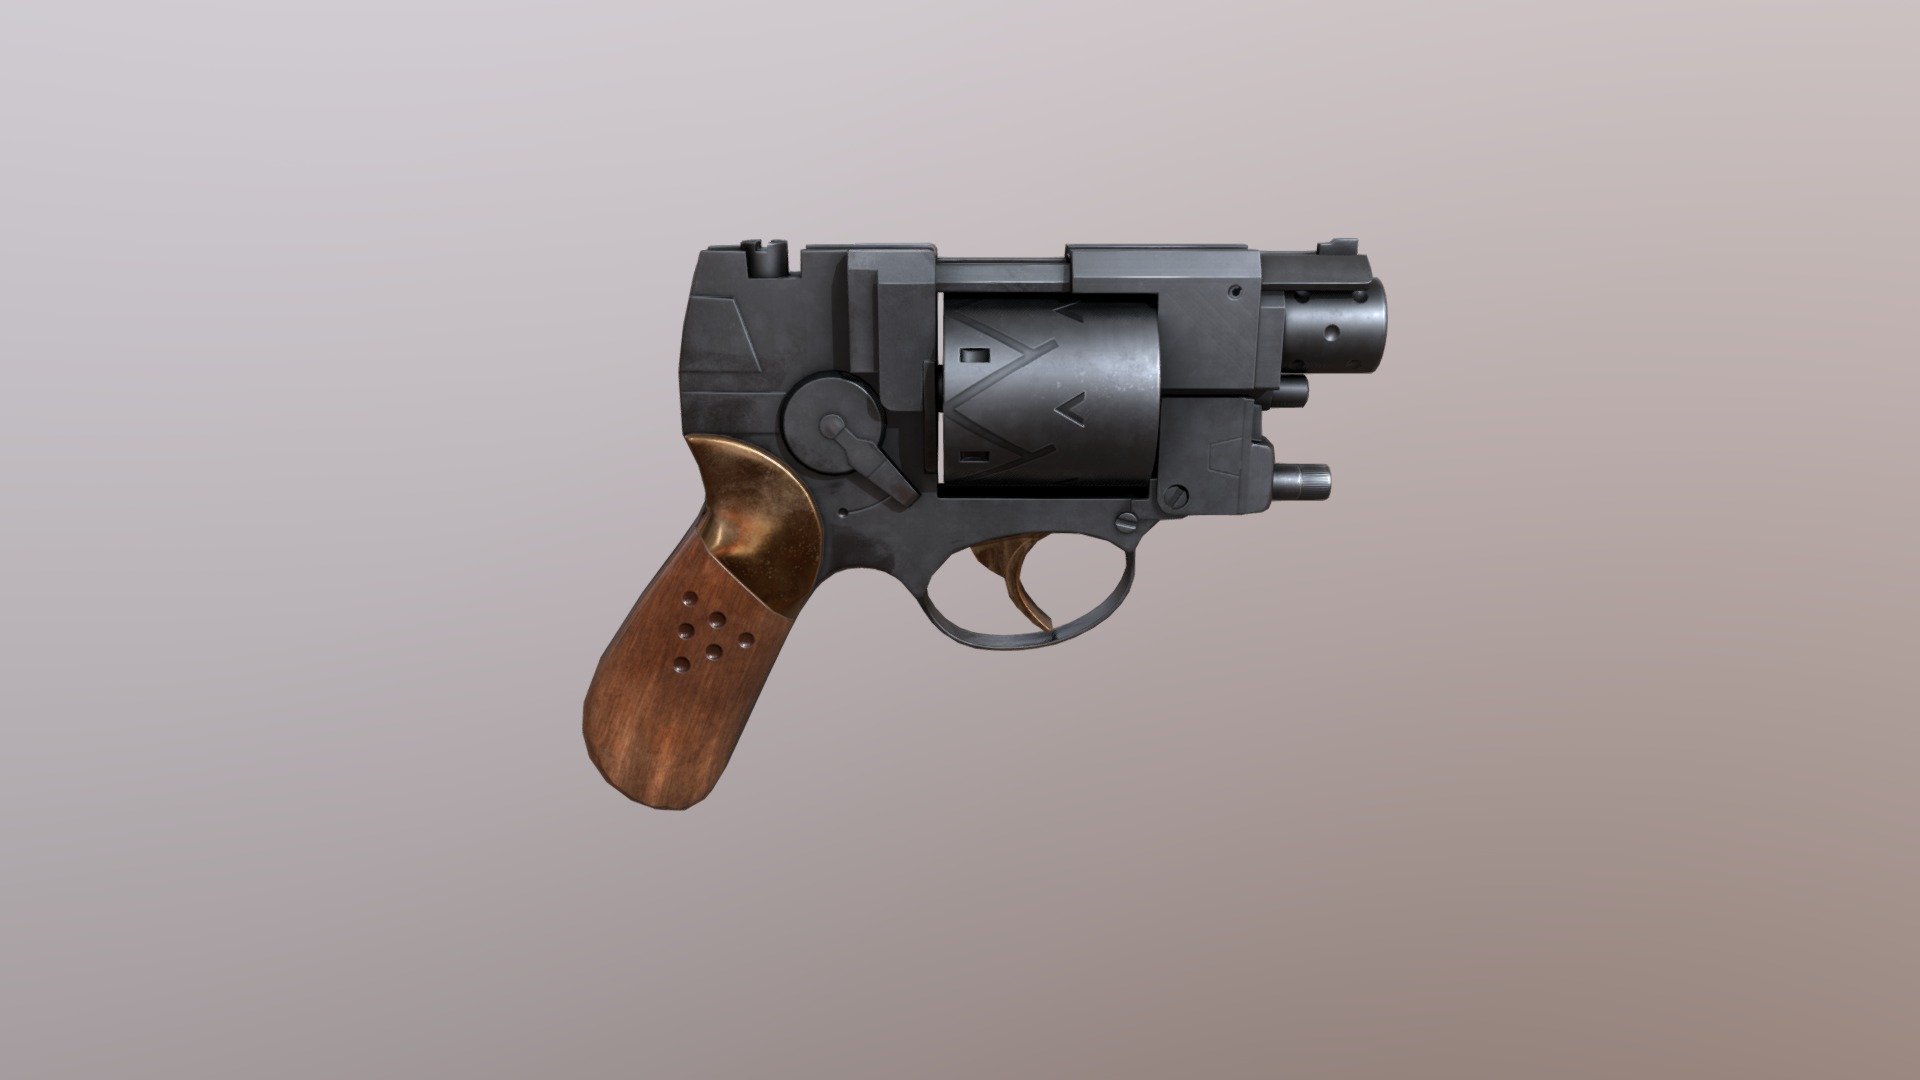 This is based on the revolver from Zeiram 2. This was made as a portfolio piece as an optimized game ready model at 3,637 triangles and a single material. Substance painter was used to bake details from a high poly sculpt and texture the model 3d model